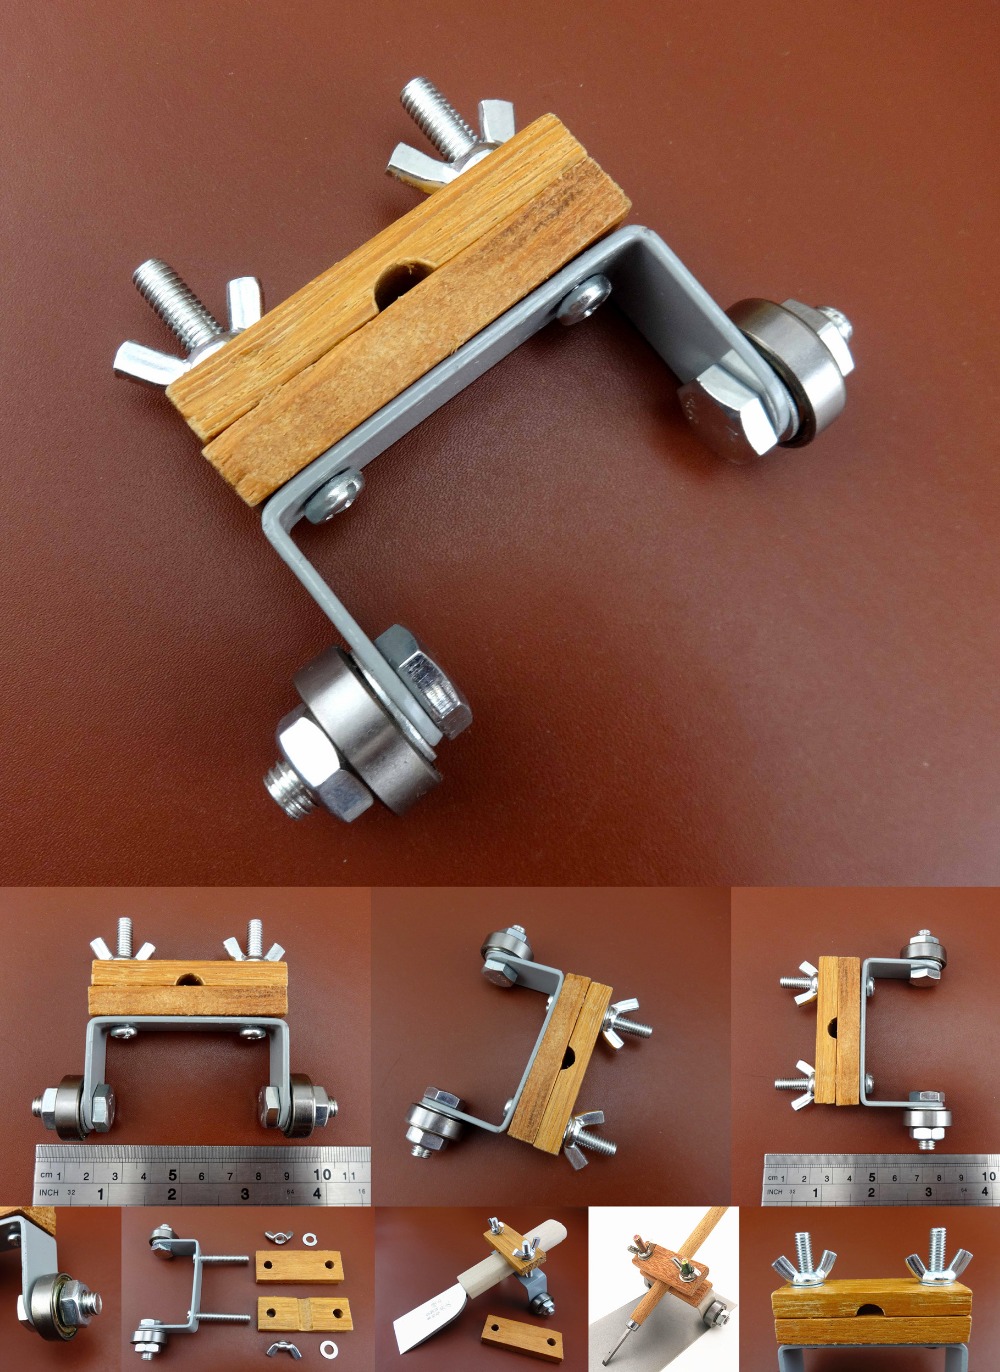 Metal Fixed-Angle Honing Guide Chisel Knife Cutter Sharpener Hand Machine Tool Leather Craft Sewing Stitching Carving Stamping